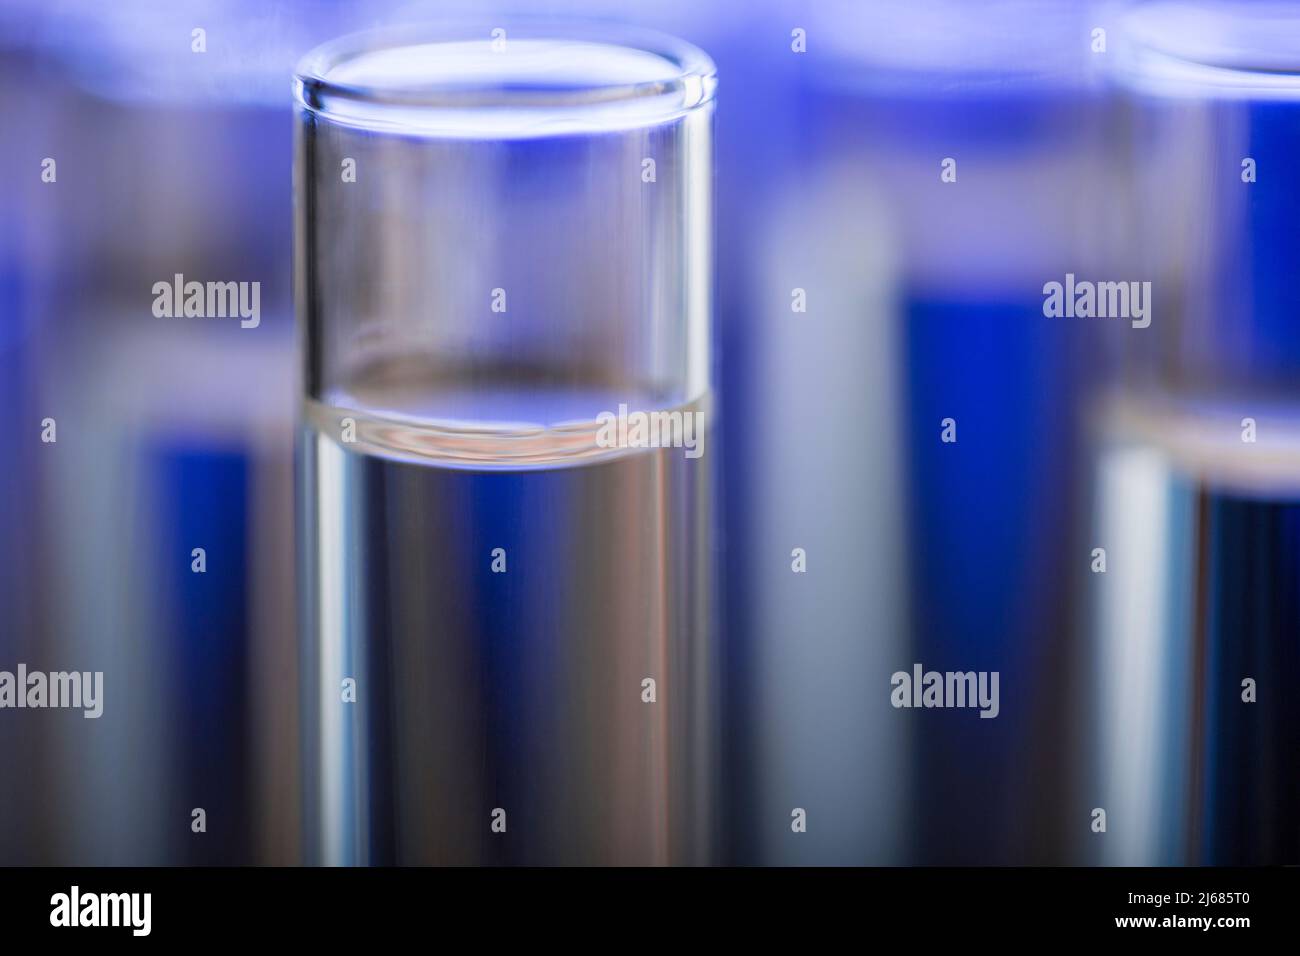 Neatly arranged test tubes containing clear reagent in chemistry laboratory - stock photo Stock Photo